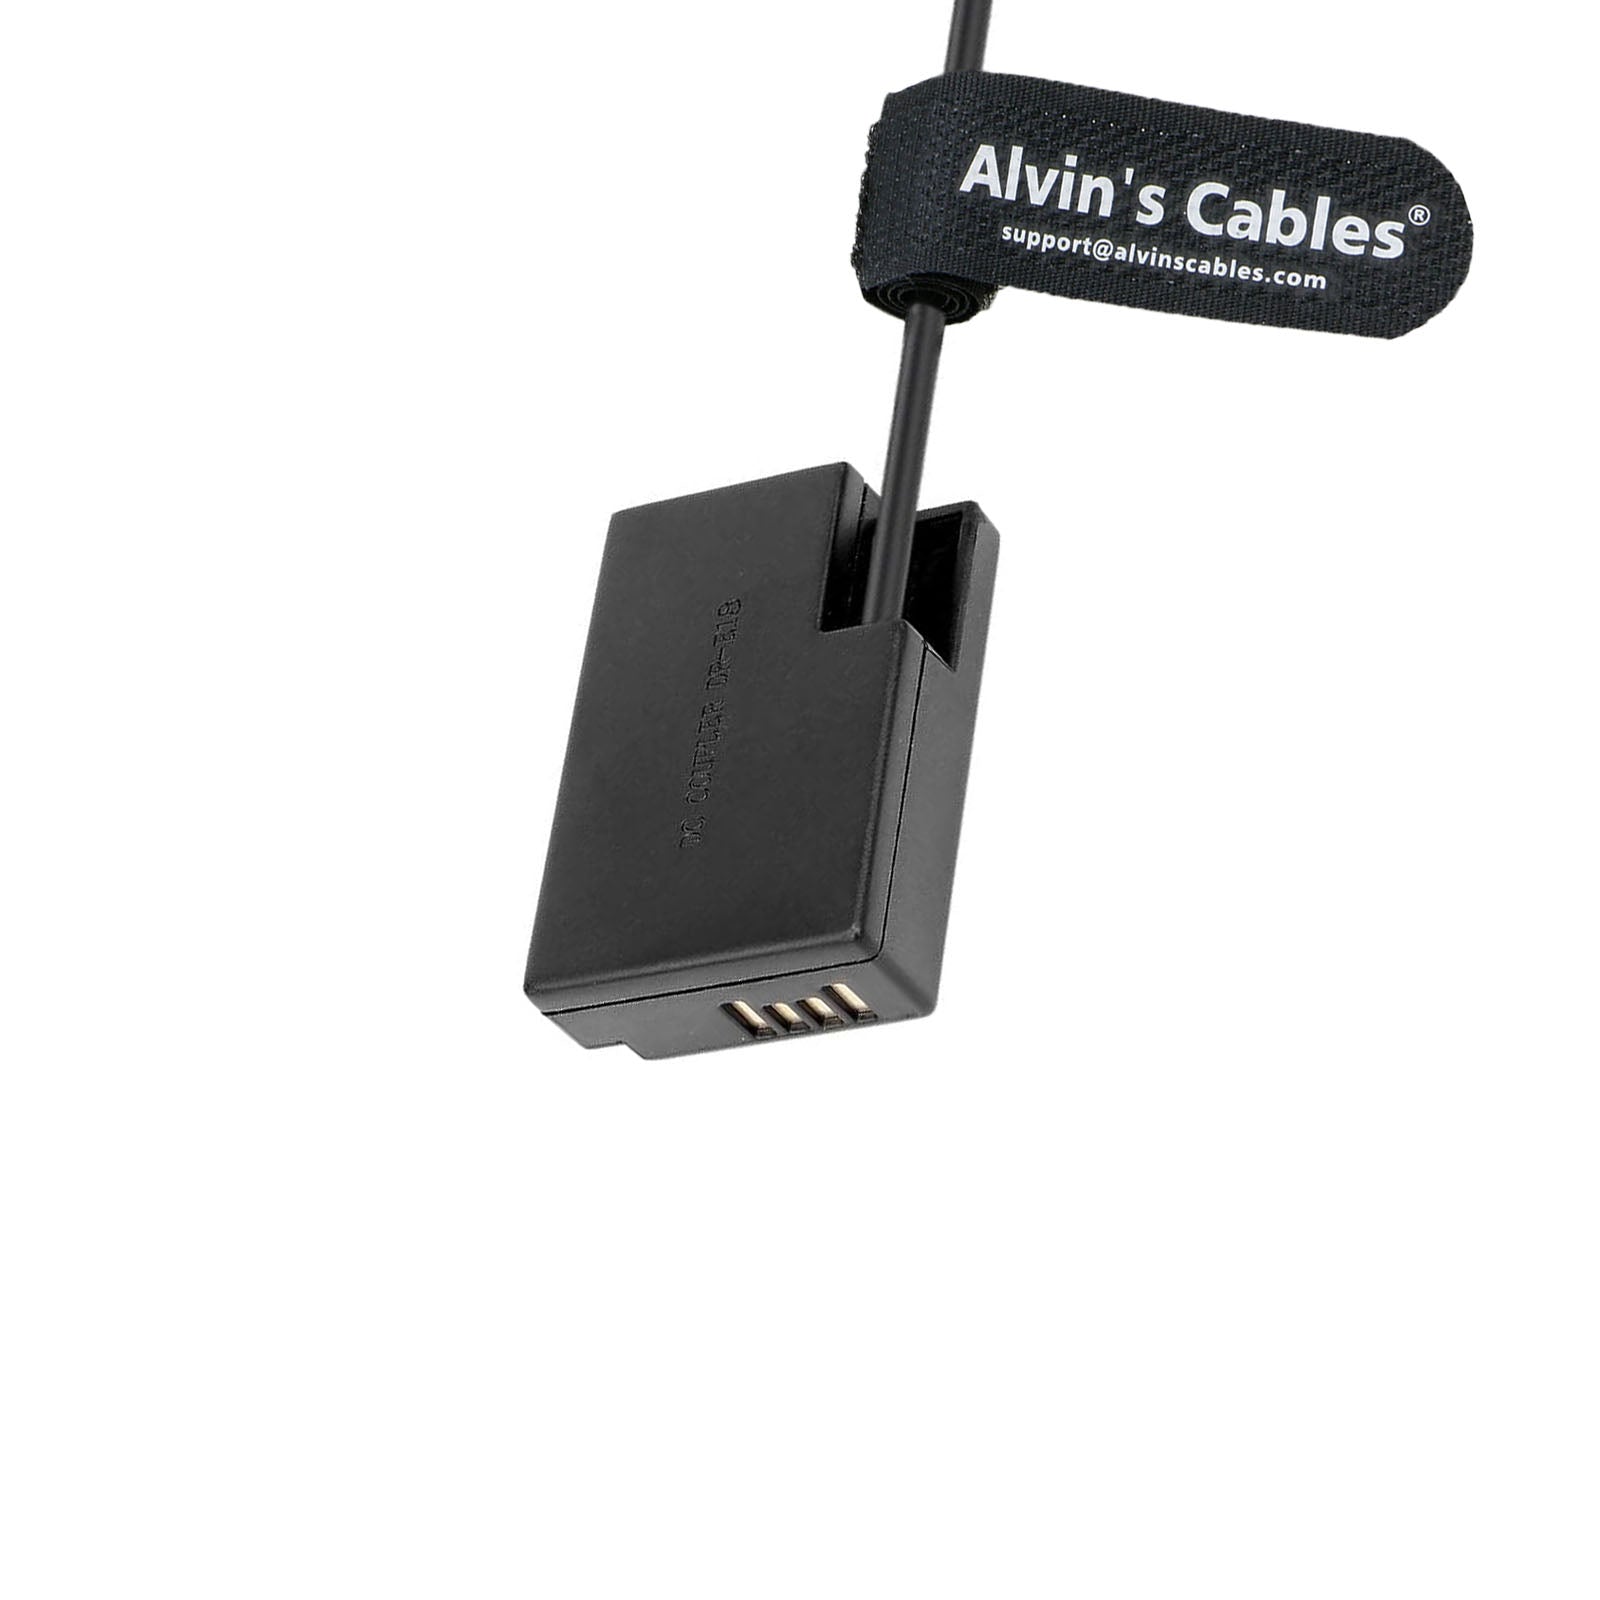 Alvin's Cables LP-E17 Dummy Battery to USB-C PD Power Cable Coiled Power Adapter for Canon EOS R8 R10 RP 200D 750D 760D 800D 77D 9000D Rebel SL2 SL3 T6i T6S T7i T8i Kiss X8i X9i X10 Cameras